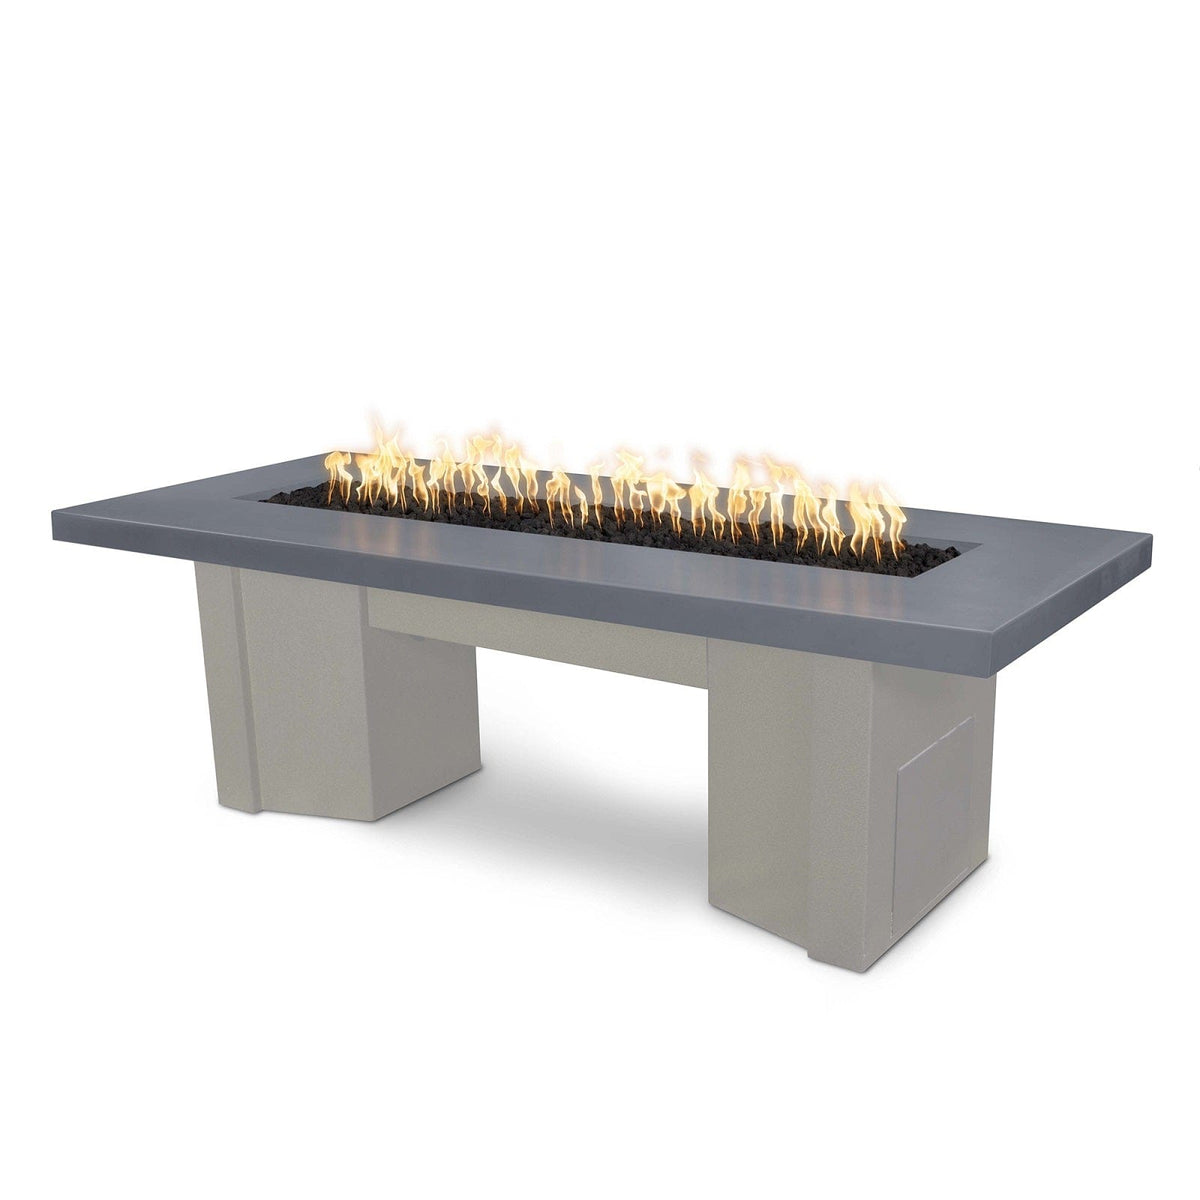 The Outdoor Plus Fire Features Gray (-GRY) / Pewter Powder Coated Steel (-PEW) The Outdoor Plus 78&quot; Alameda Fire Table Smooth Concrete in Liquid Propane - Match Lit with Flame Sense System / OPT-ALMGFRC78FSML-LP